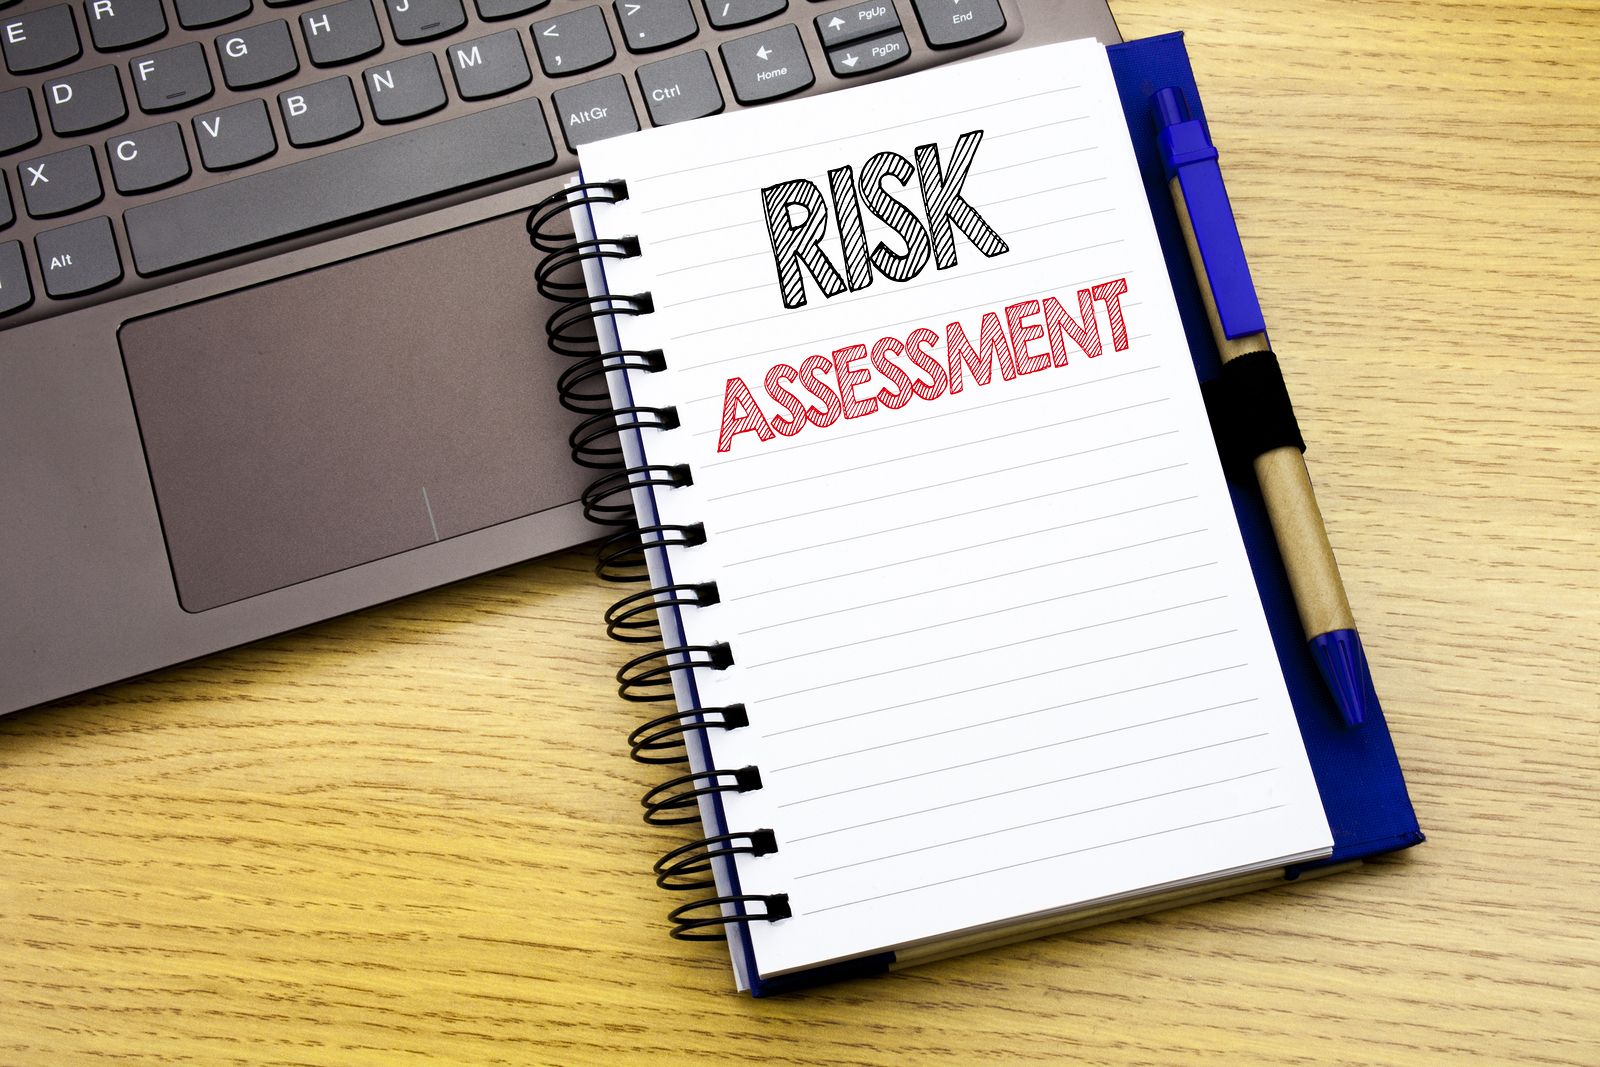 Unsure how to protect your SMB from cybersecurity threats? We explain how an SMB cybersecurity risk assessment helps and outline the most critical areas to cover